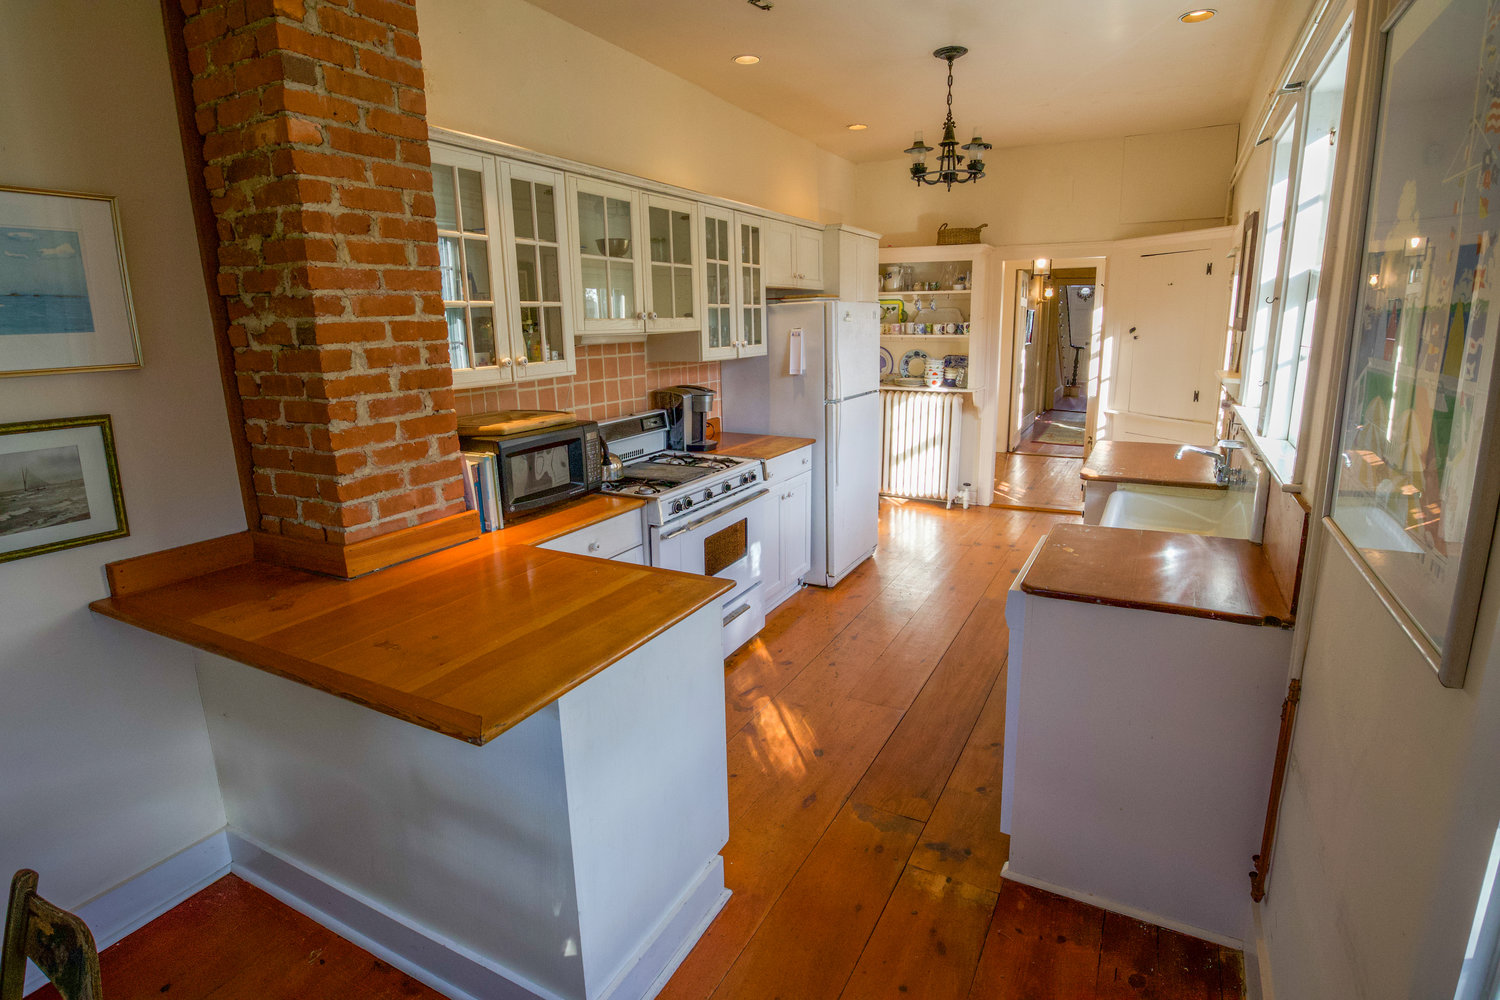 The kitchen of this Orange Street row house has wood floors, wood-topped counters and glass-front cabinets with plenty of storage space.